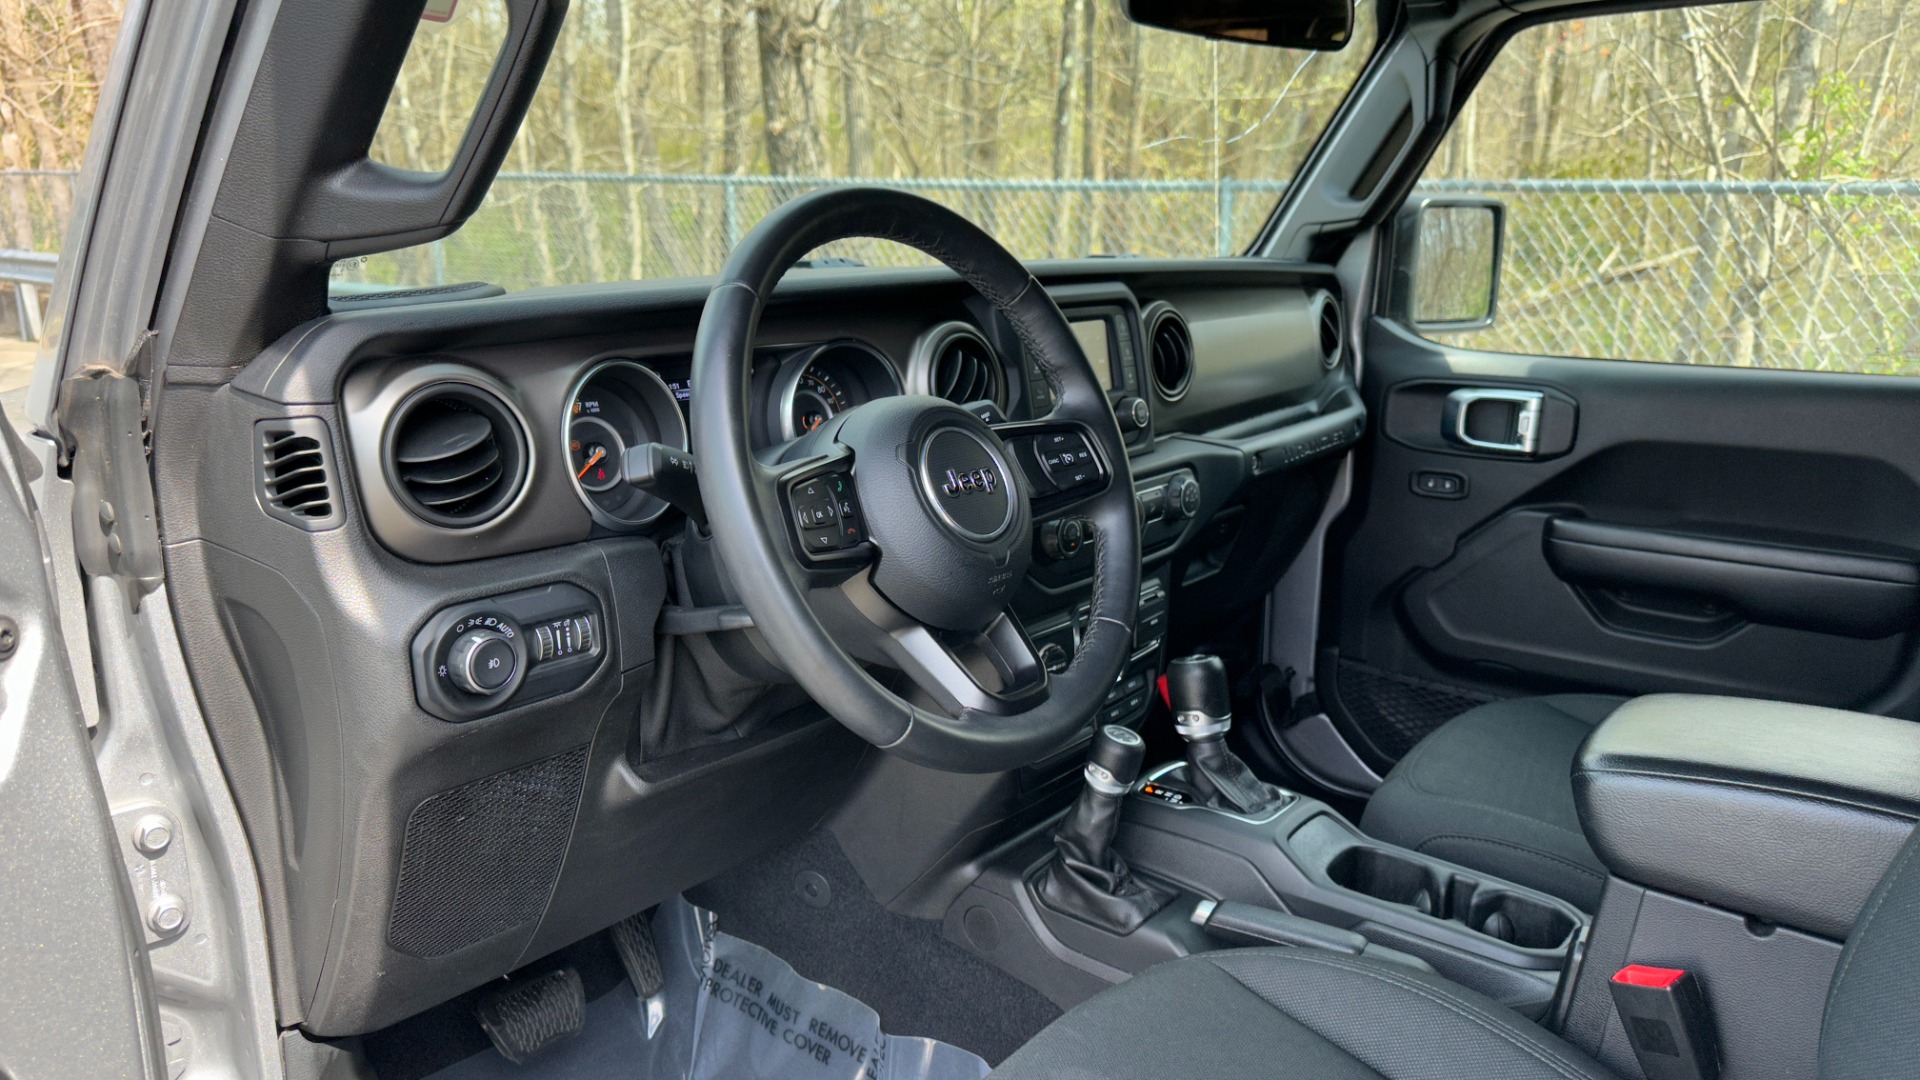 Used 2018 Jeep Wrangler Unlimited Sport S / SOFT TOP / CLOTH SEATS / SIDE STEPS / TRAILERING PACKAGE for sale $33,500 at Formula Imports in Charlotte NC 28227 25